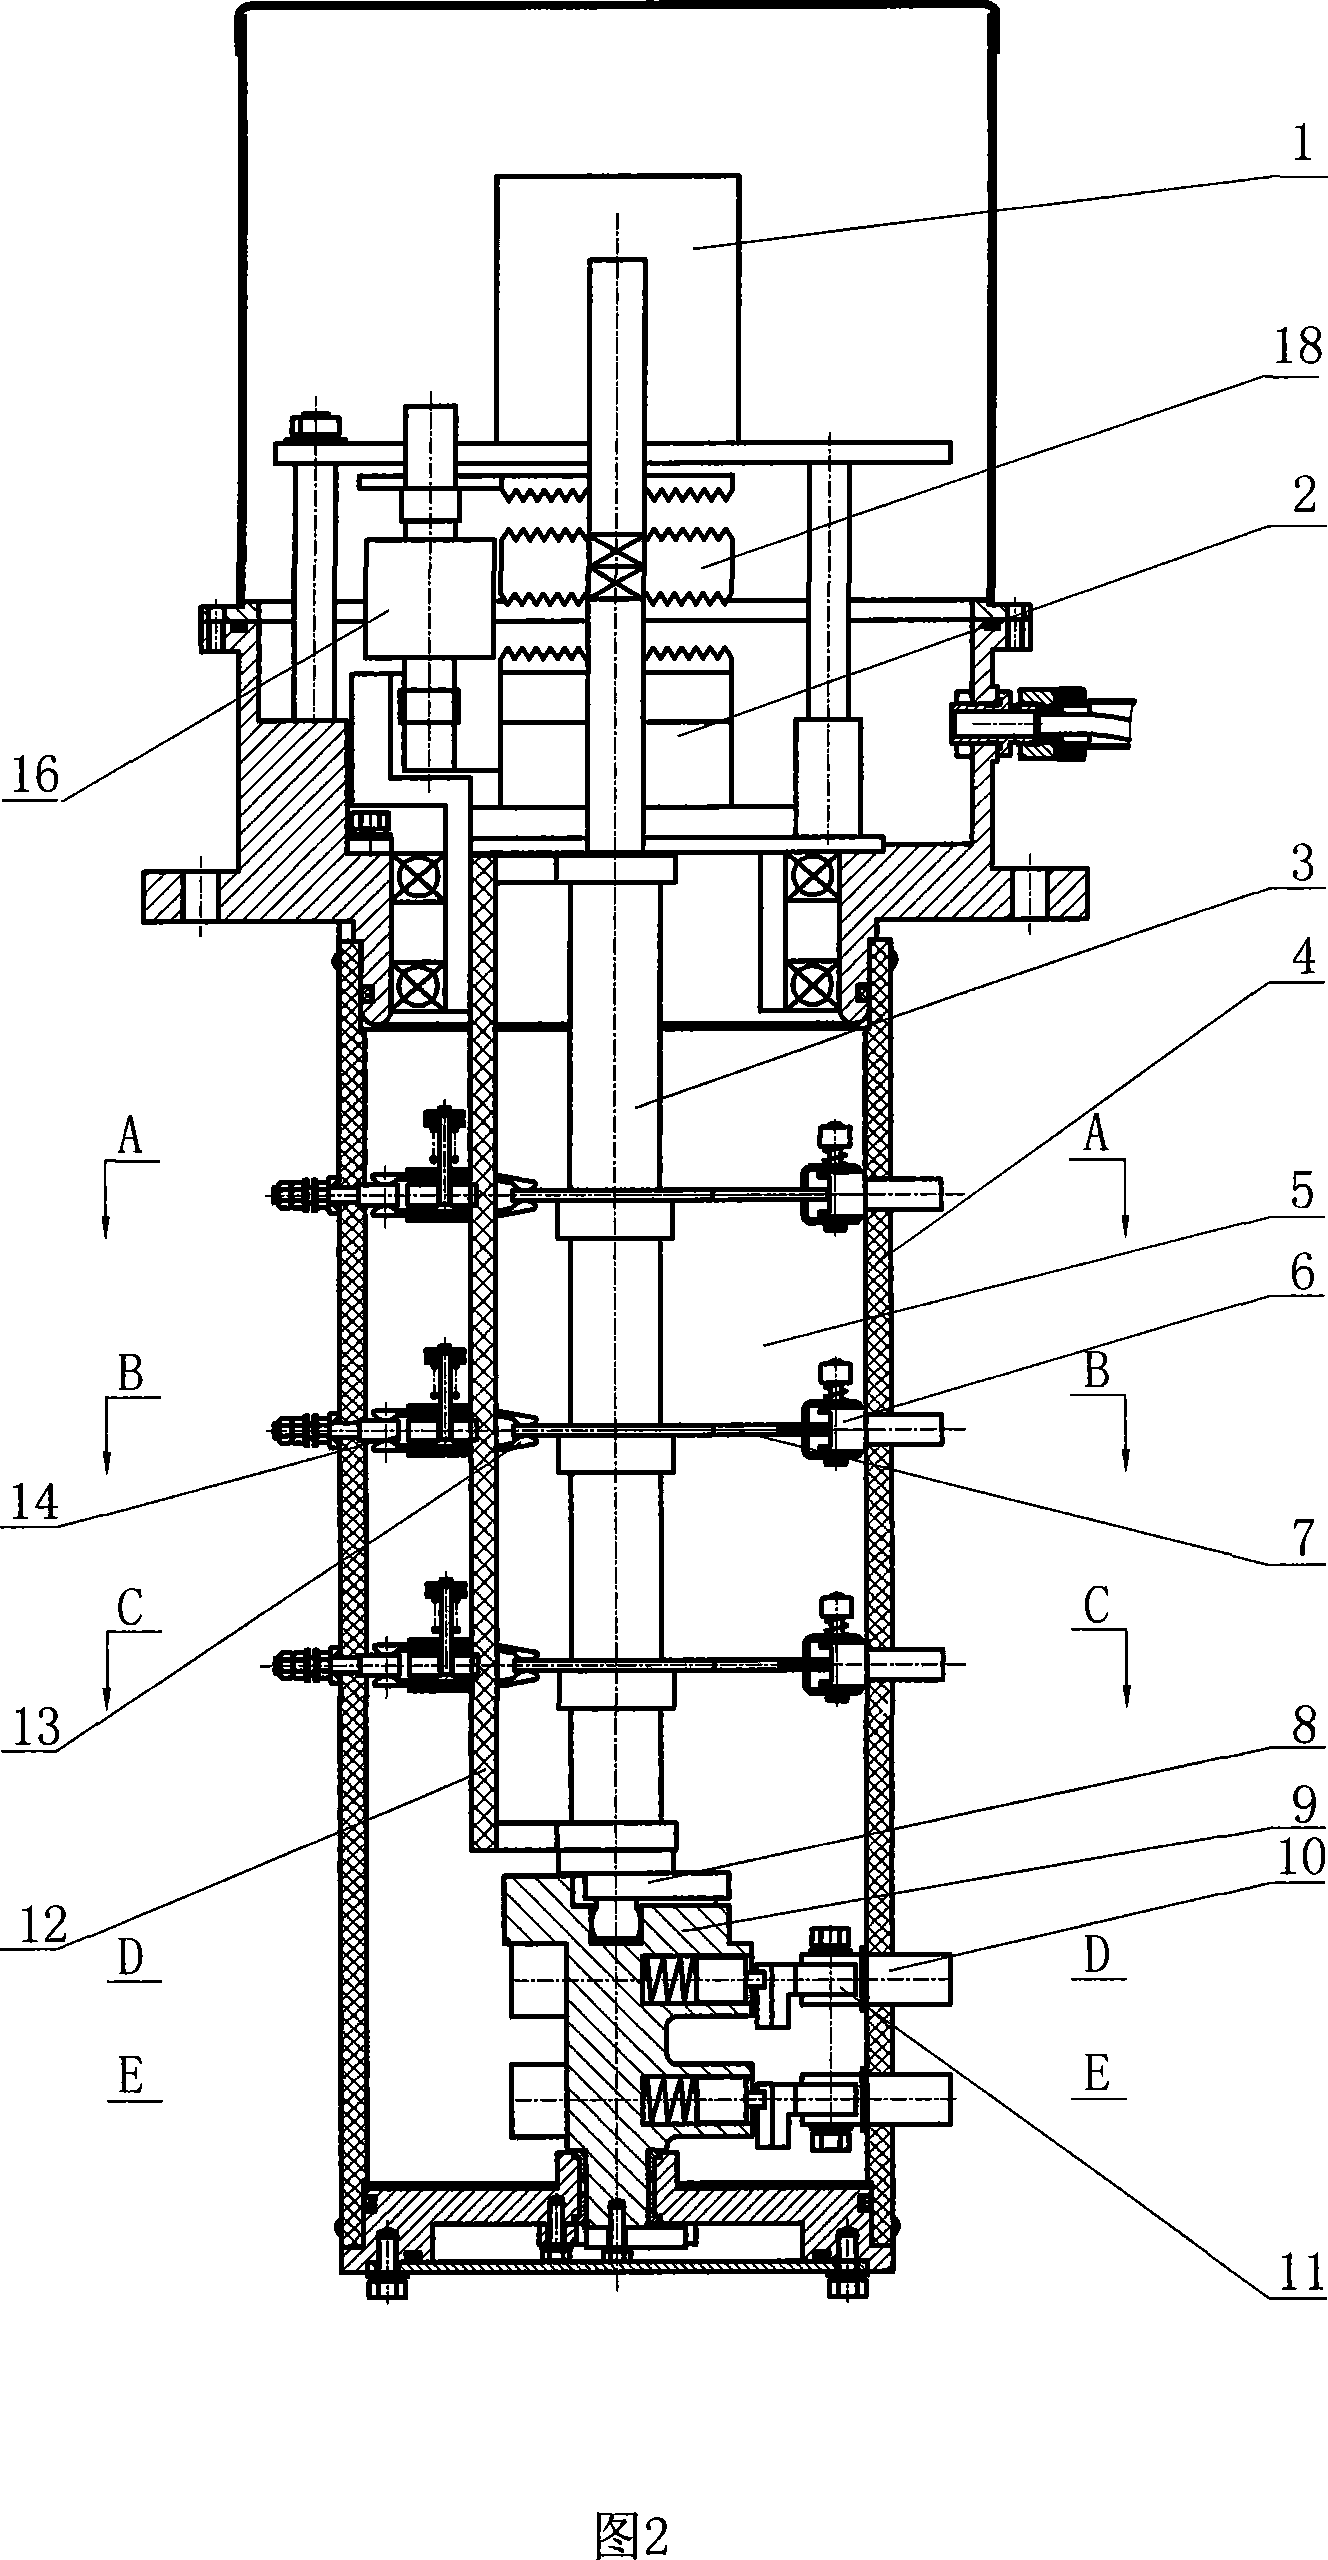 Load capacity and pressure regulating switch for transformer